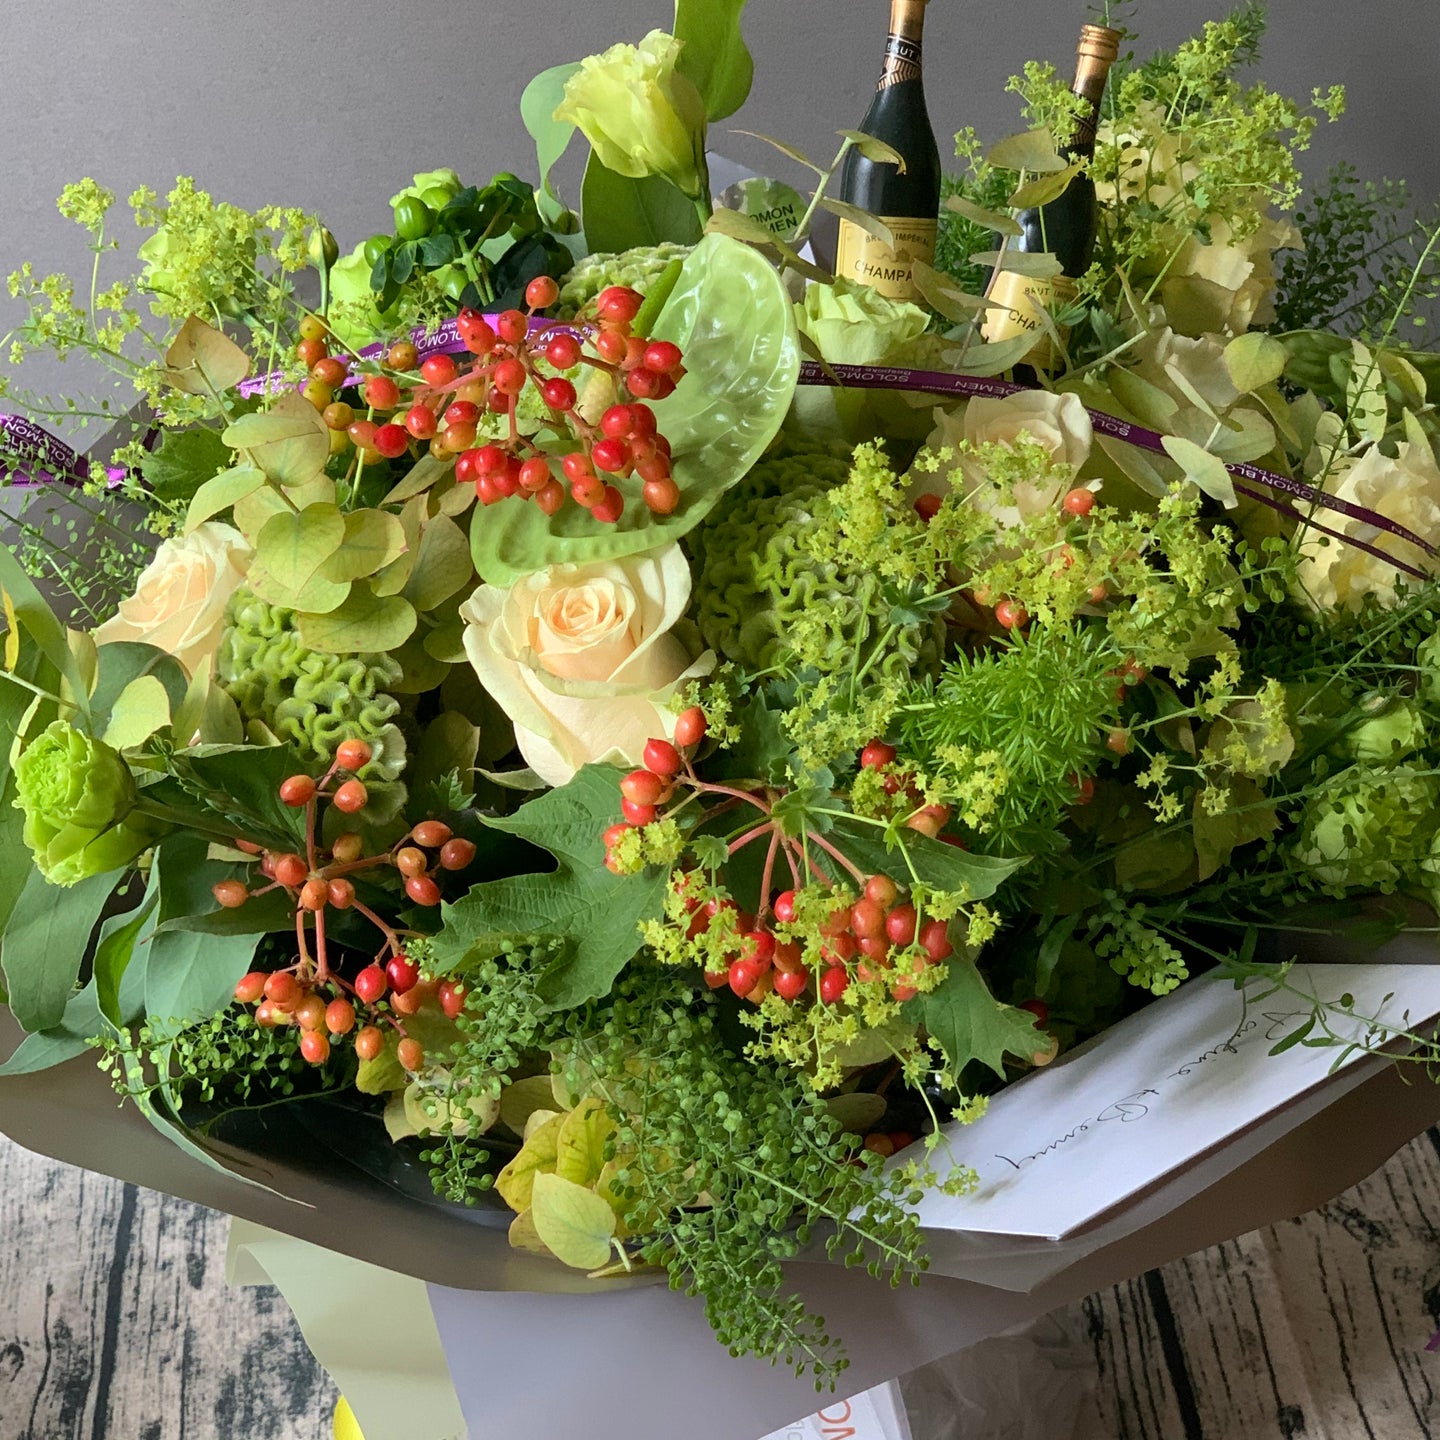 The green bouquet